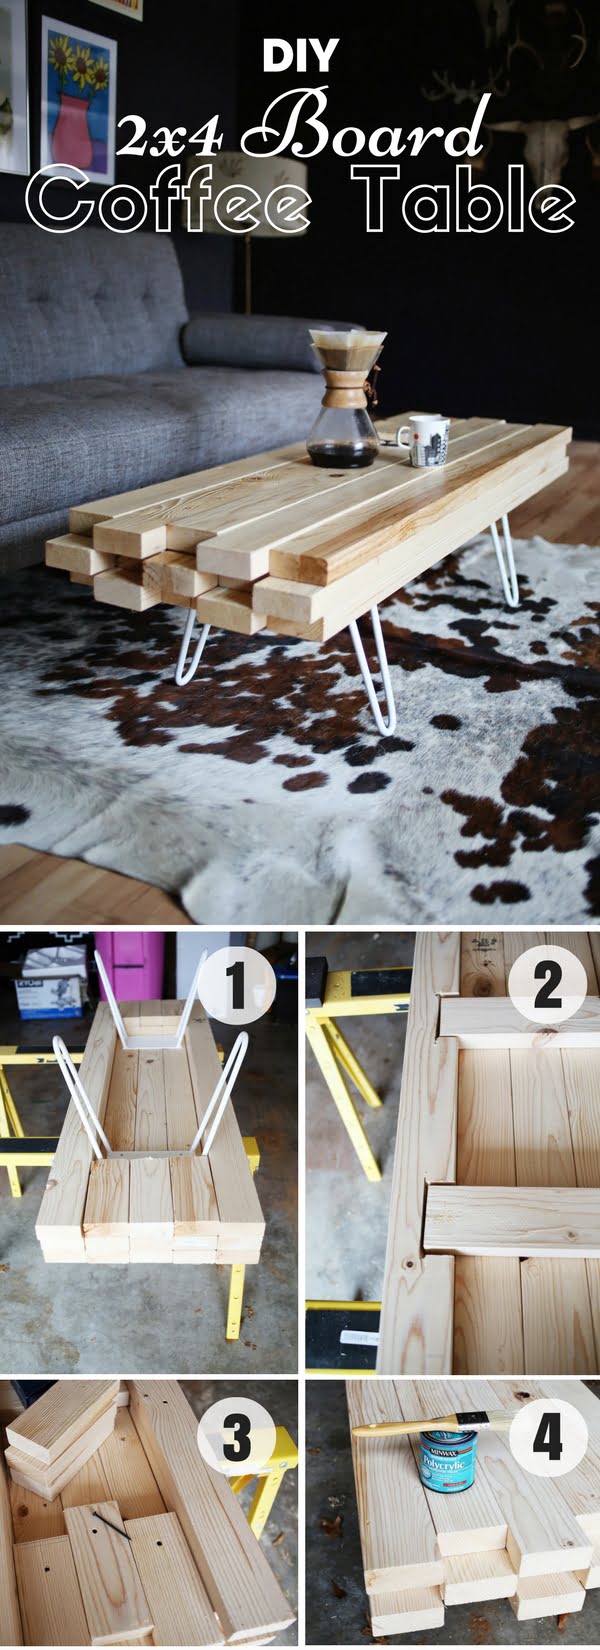 20 Crafty 2x4 DIY Projects That You Can Easily Make - Check out how to make this easy DIY 2x4 Board Coffee Table